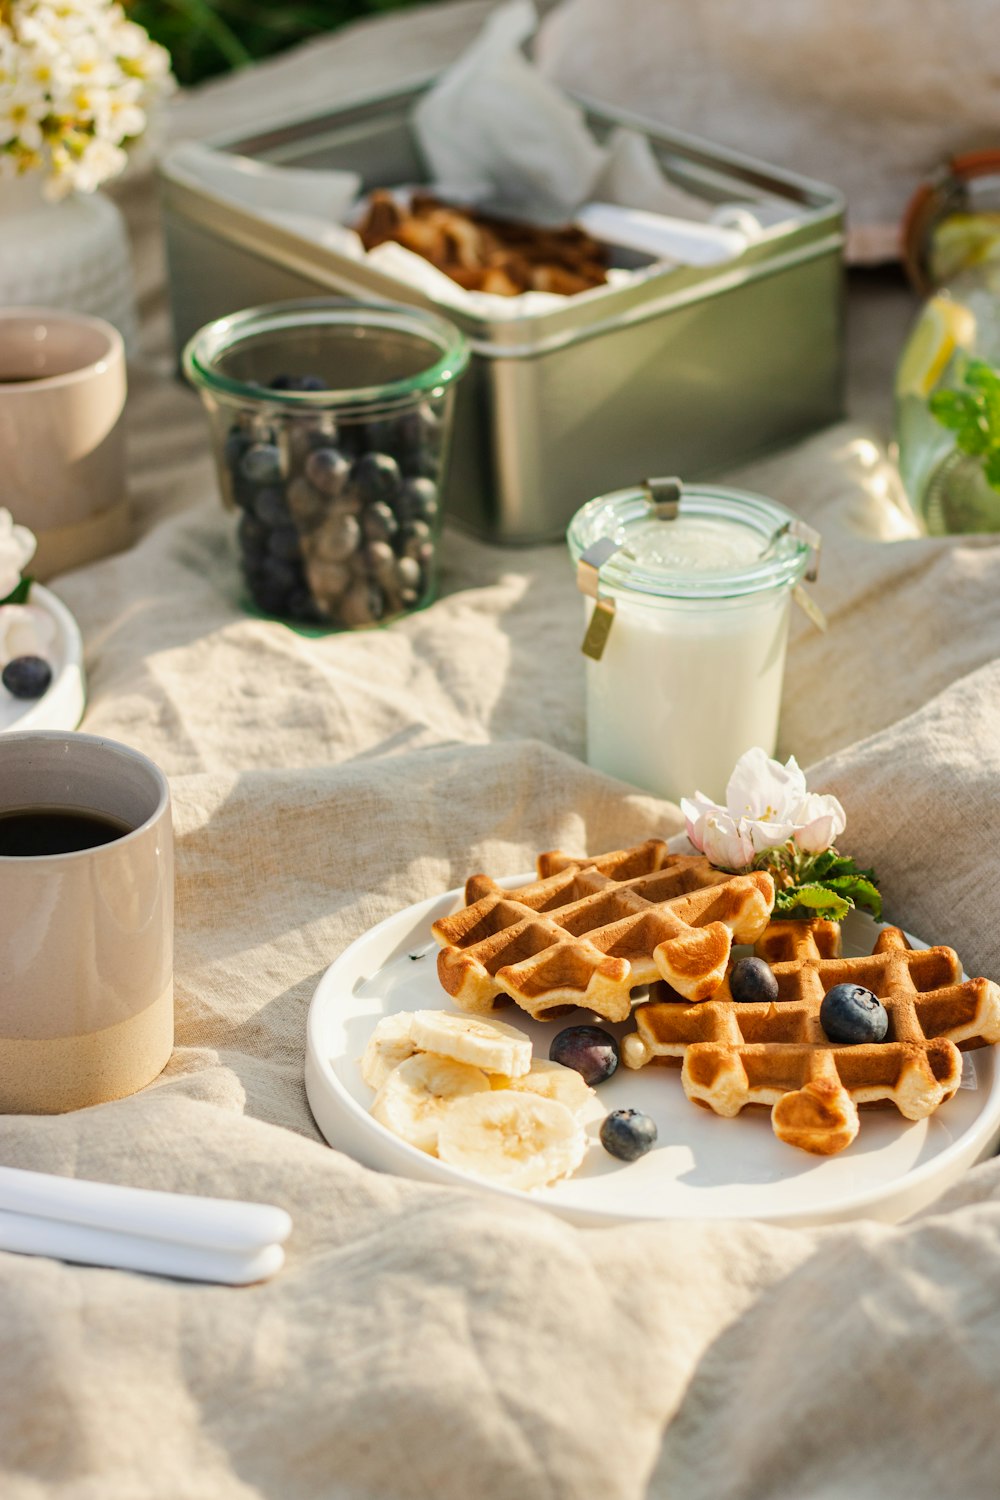 a plate of waffles and coffee